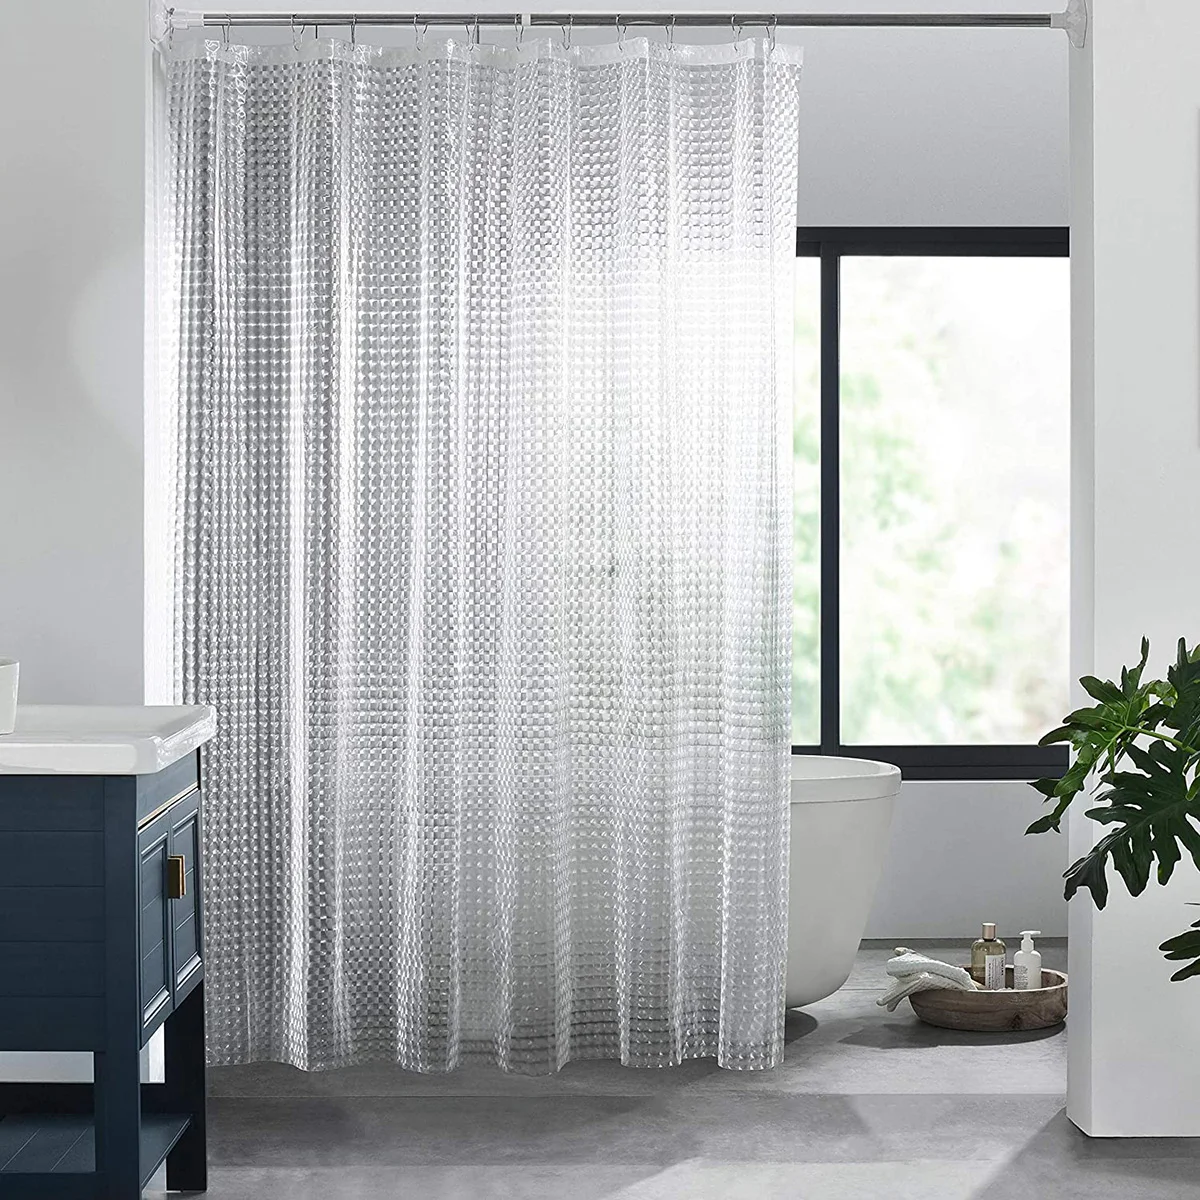 

3d Waterproof with 12pcs hooks Shower Curtain Transparent Clear Bathroom Curtain Luxury peva shower curtain, Customized